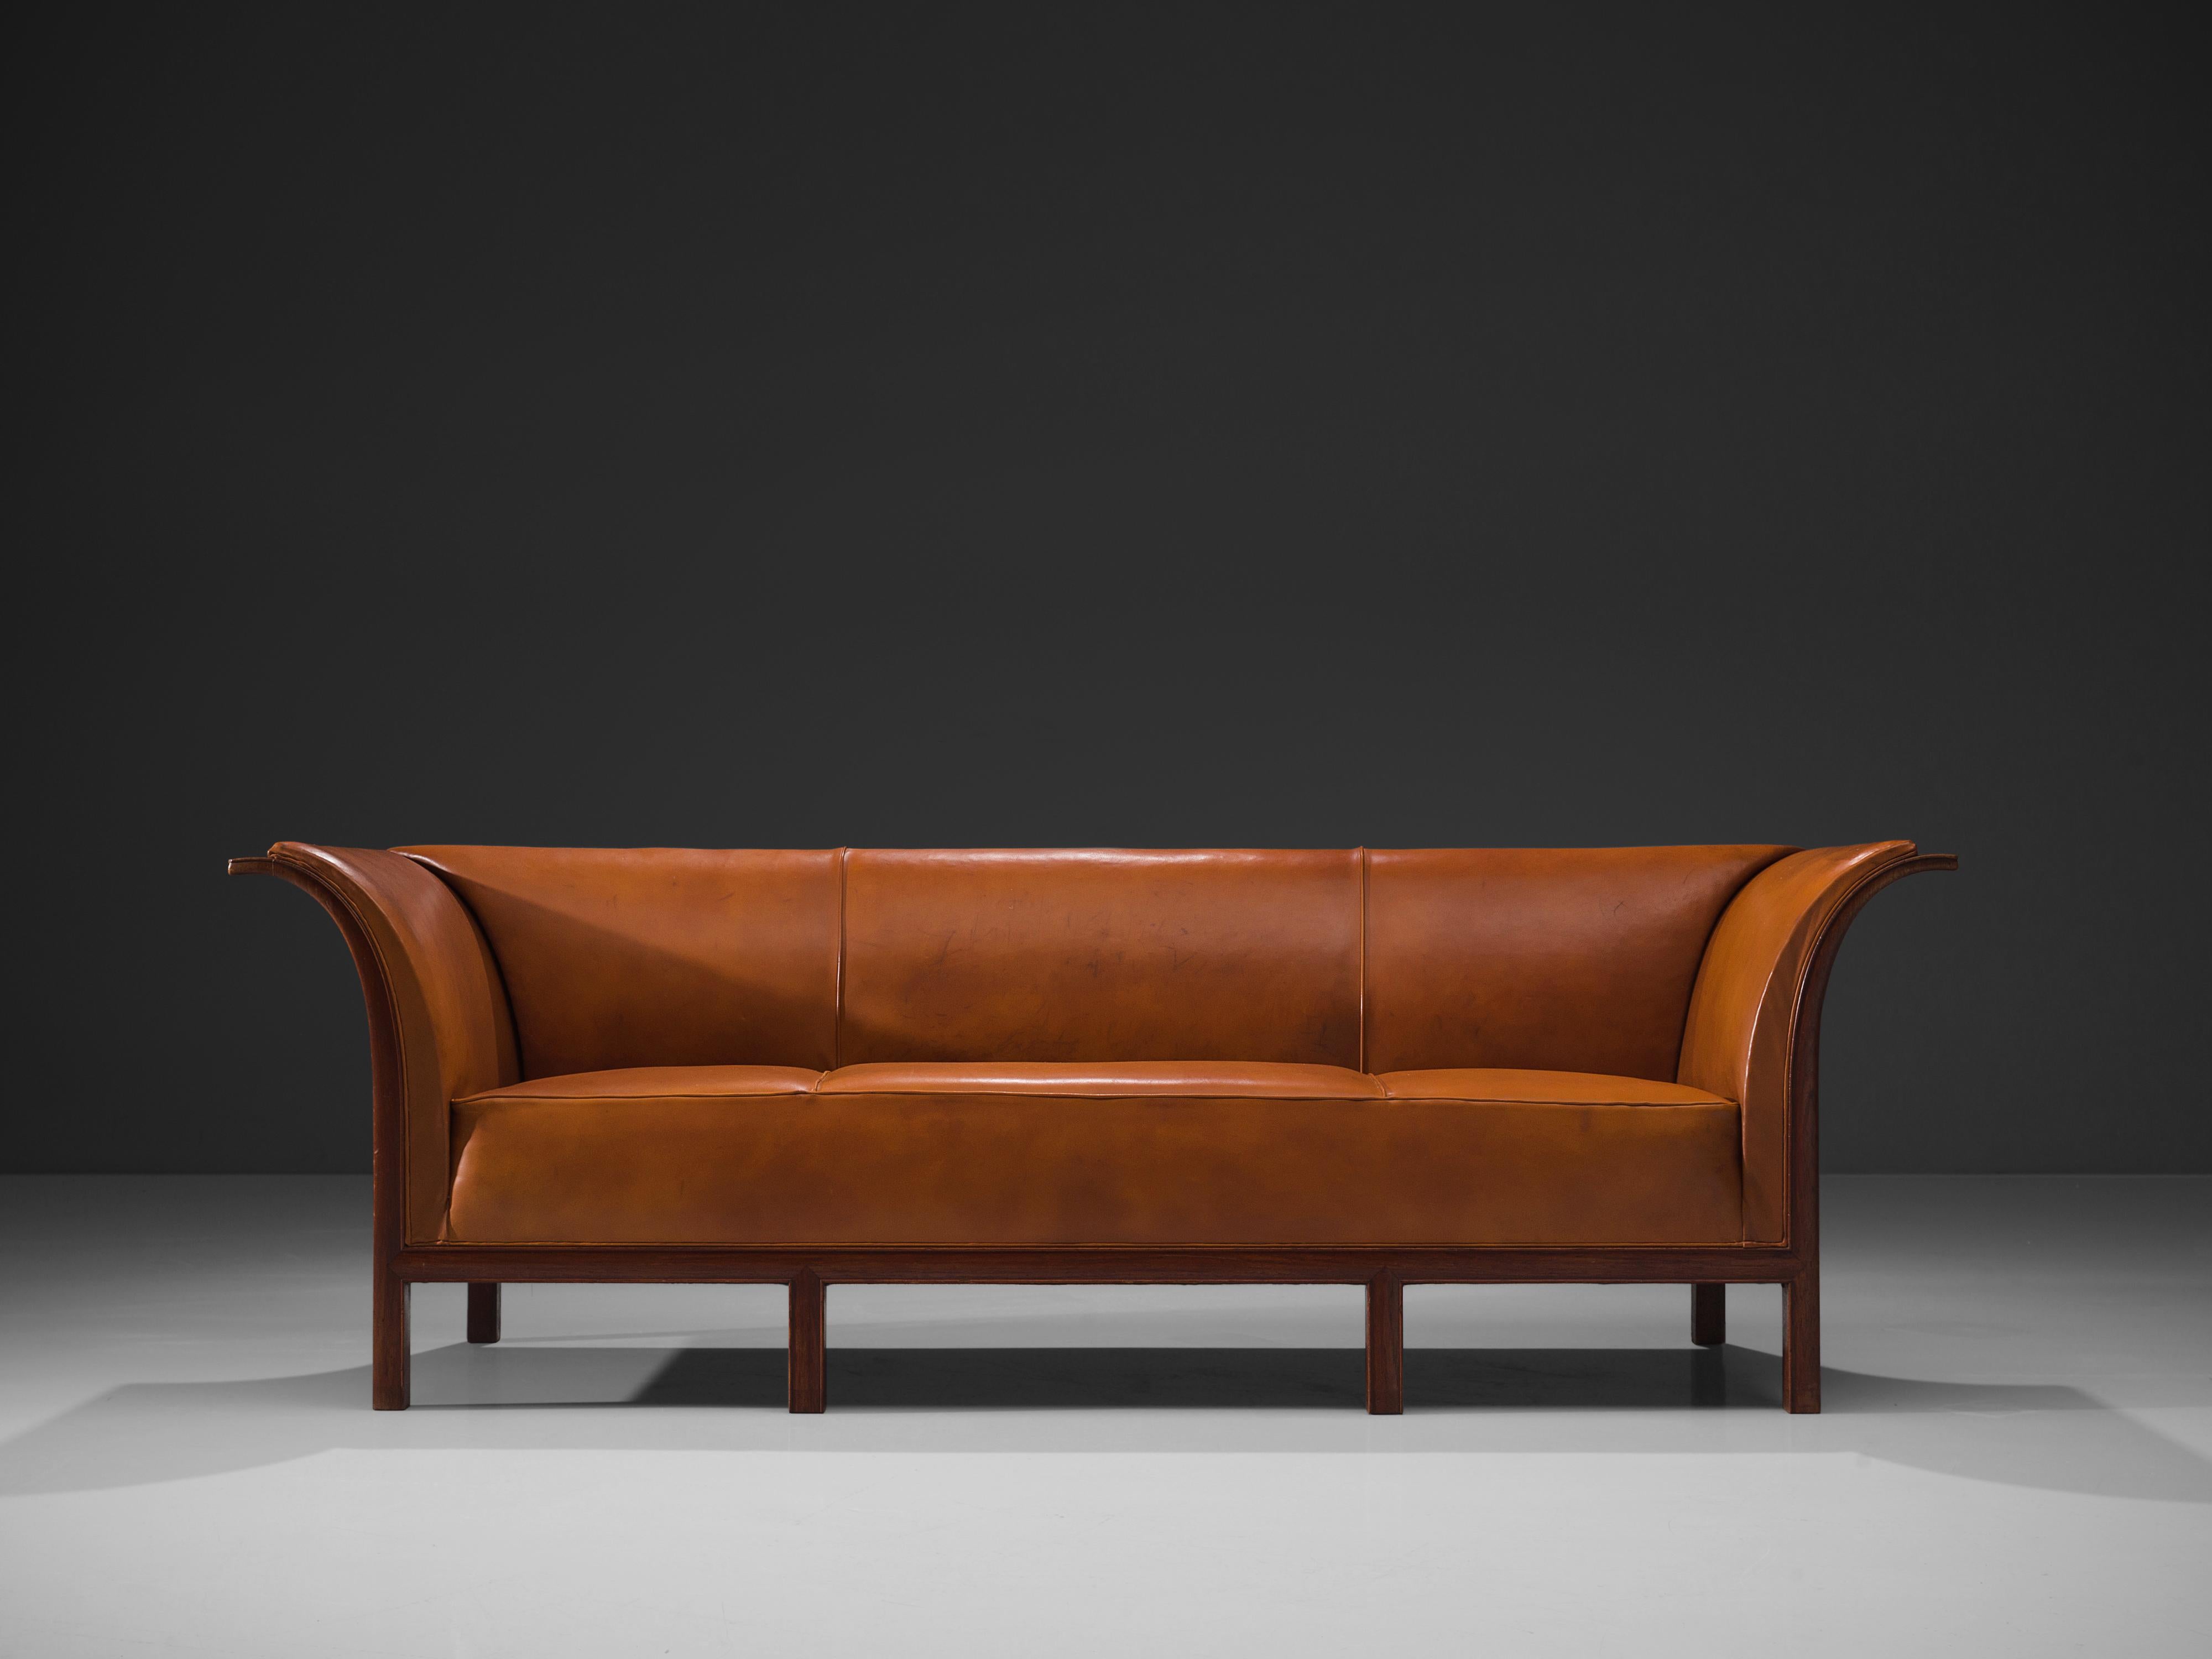 Frits Henningsen, sofa in teak, cognac leather, Denmark, 1930s

This classic sofa was designed and produced by master cabinetmaker Frits Henningsen in the 1930s. The design is well-balanced, showing an interesting contrast between the straight lines